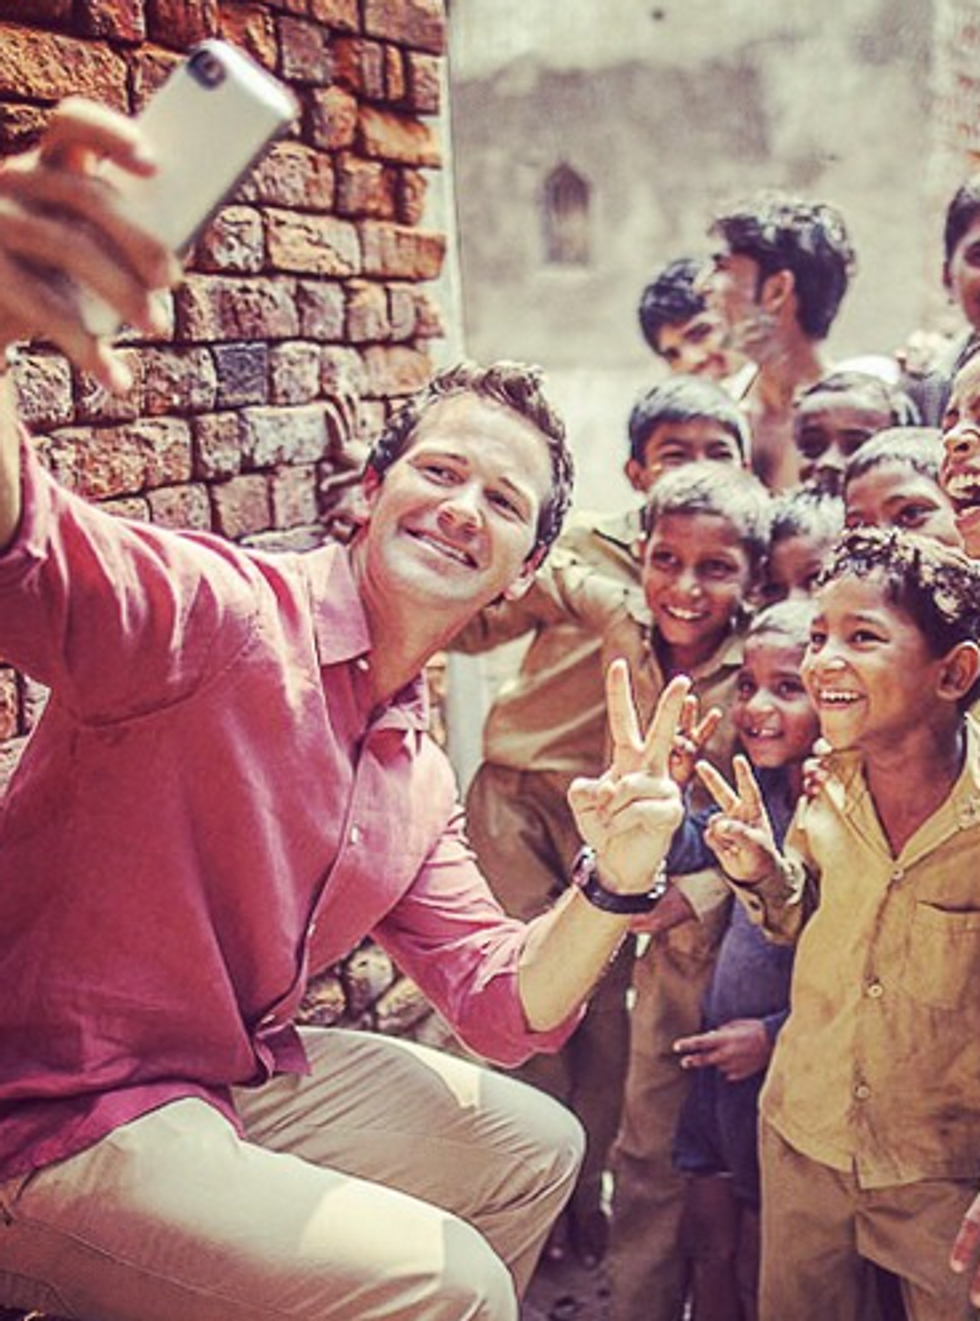 Aaron Schock Snuck Hot Male Personal Photographer On India Trip, How Romantic!